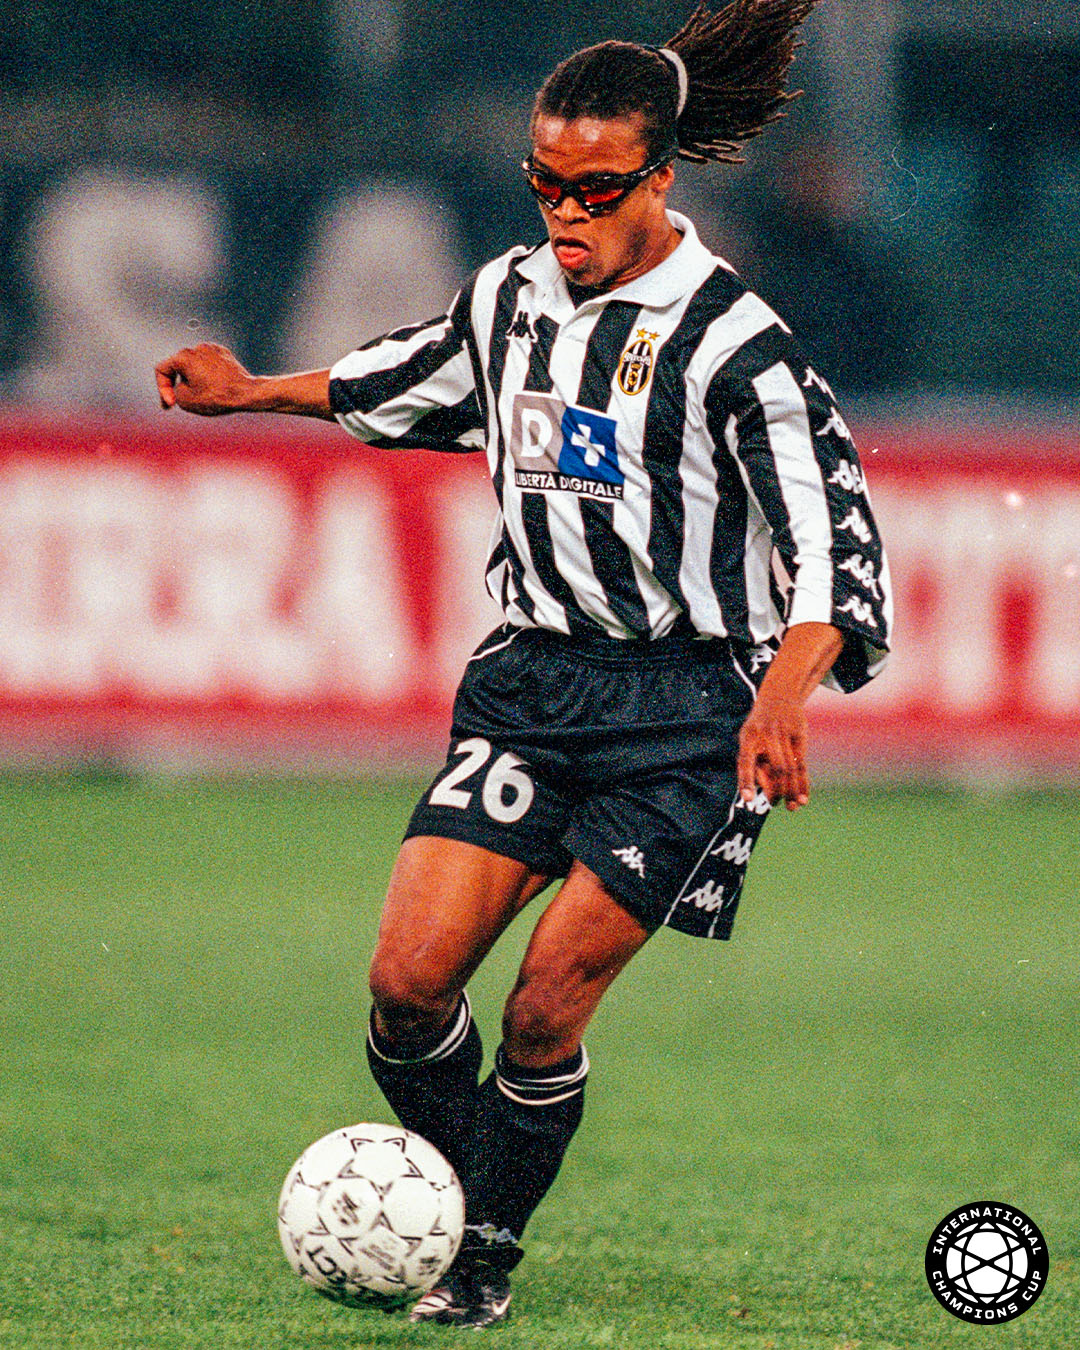 Happy birthday to the man who made iconic in football!

Edgar Davids is 47 years young today 